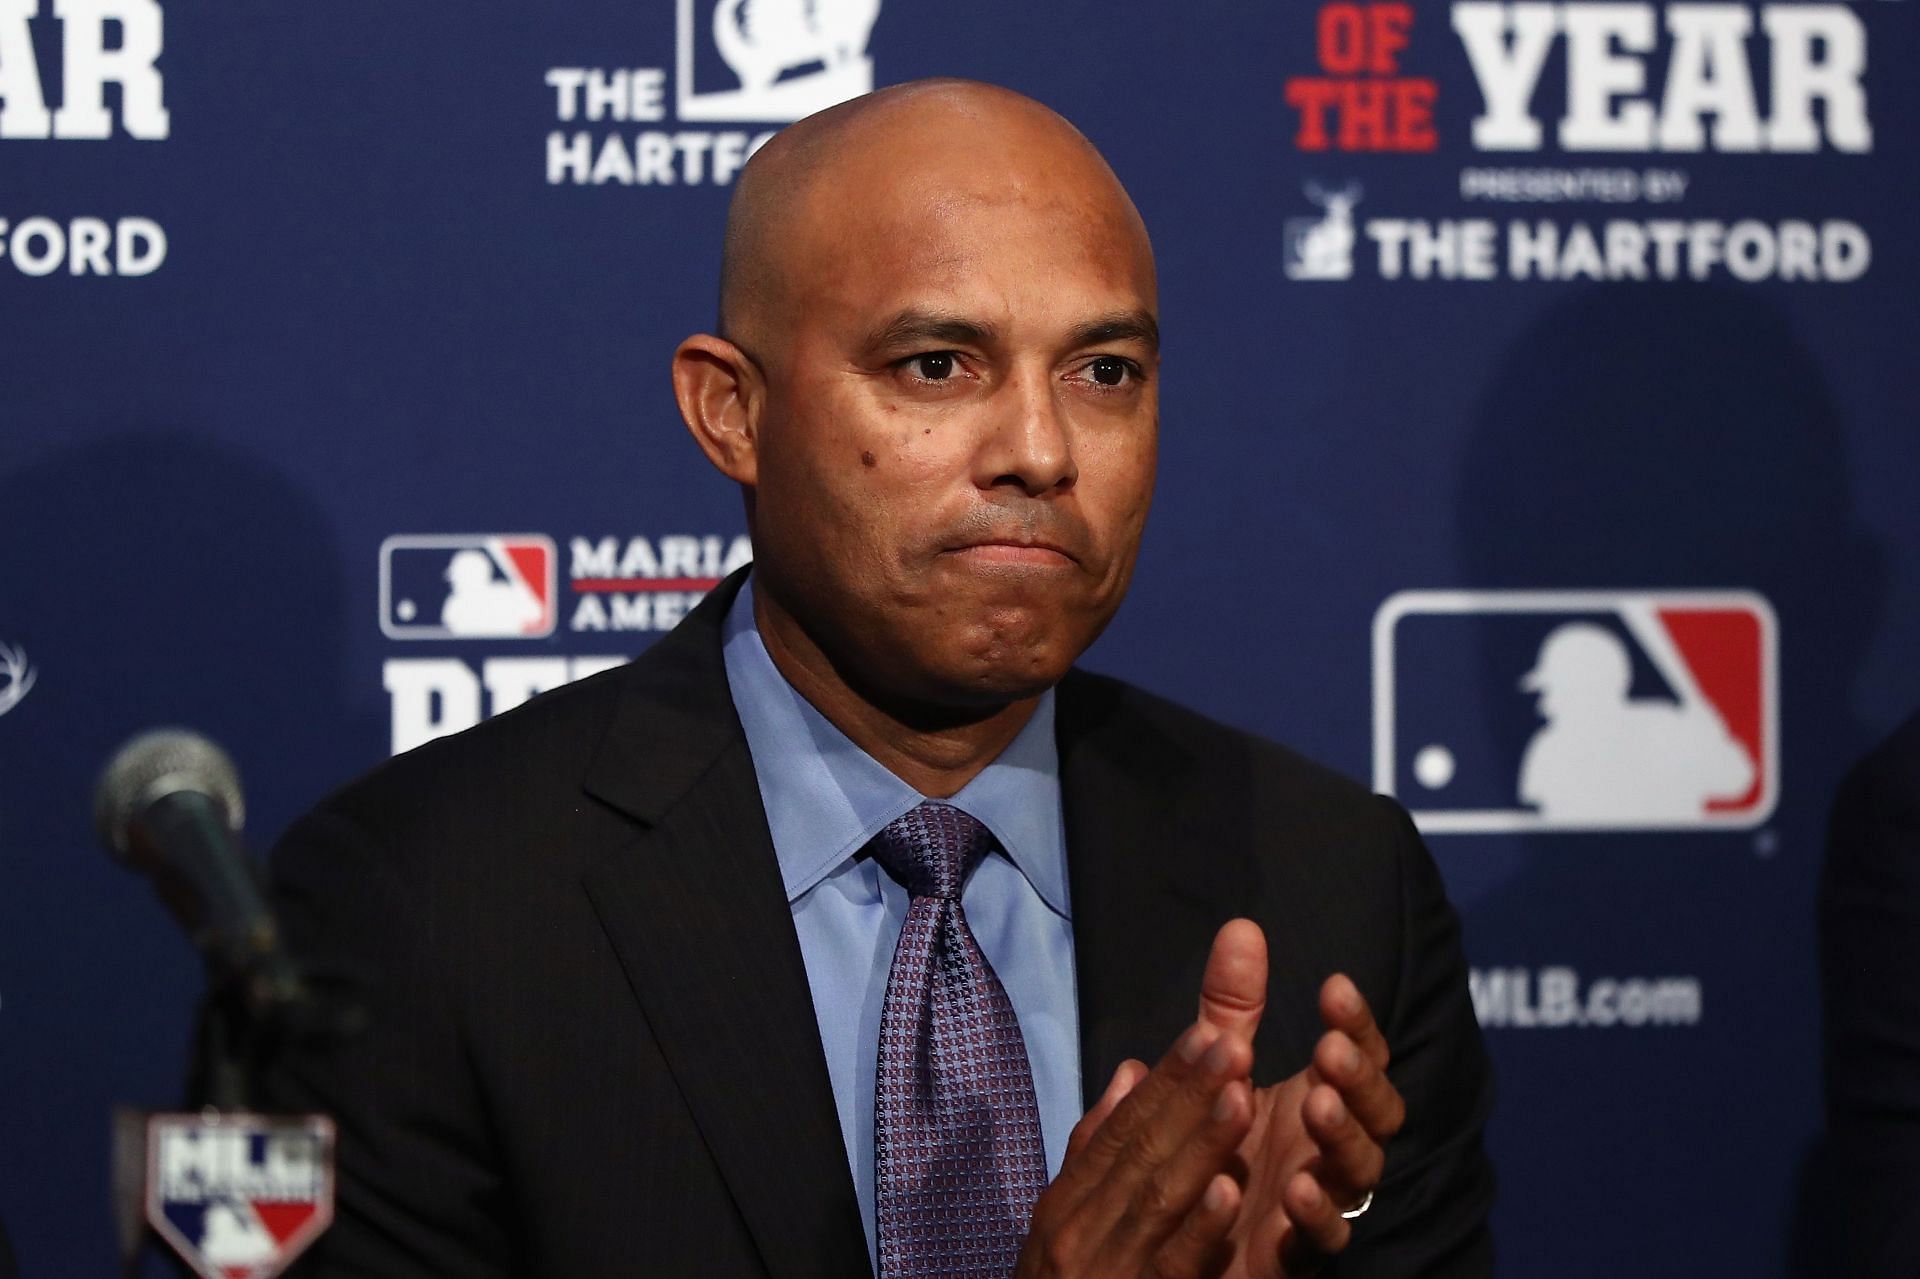 Mariano Rivera wouldn't keep Aaron Boone as Yankees manager